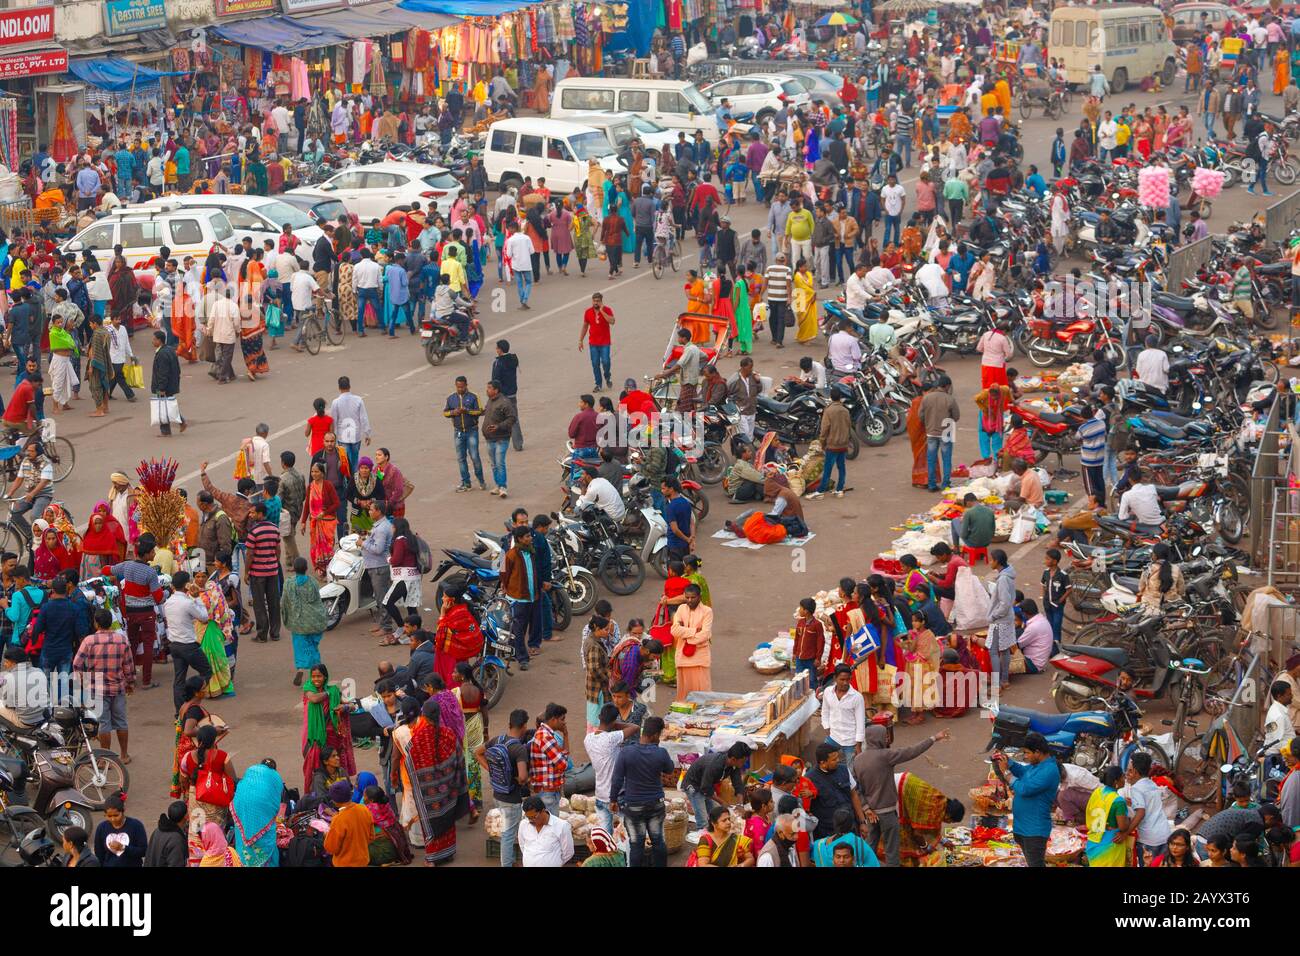 PURI, INDIA, JANUARY 13, 2019 : Perspective point of view of the crowded street market at dusk near the famous Shree Jagannath Temple Stock Photo